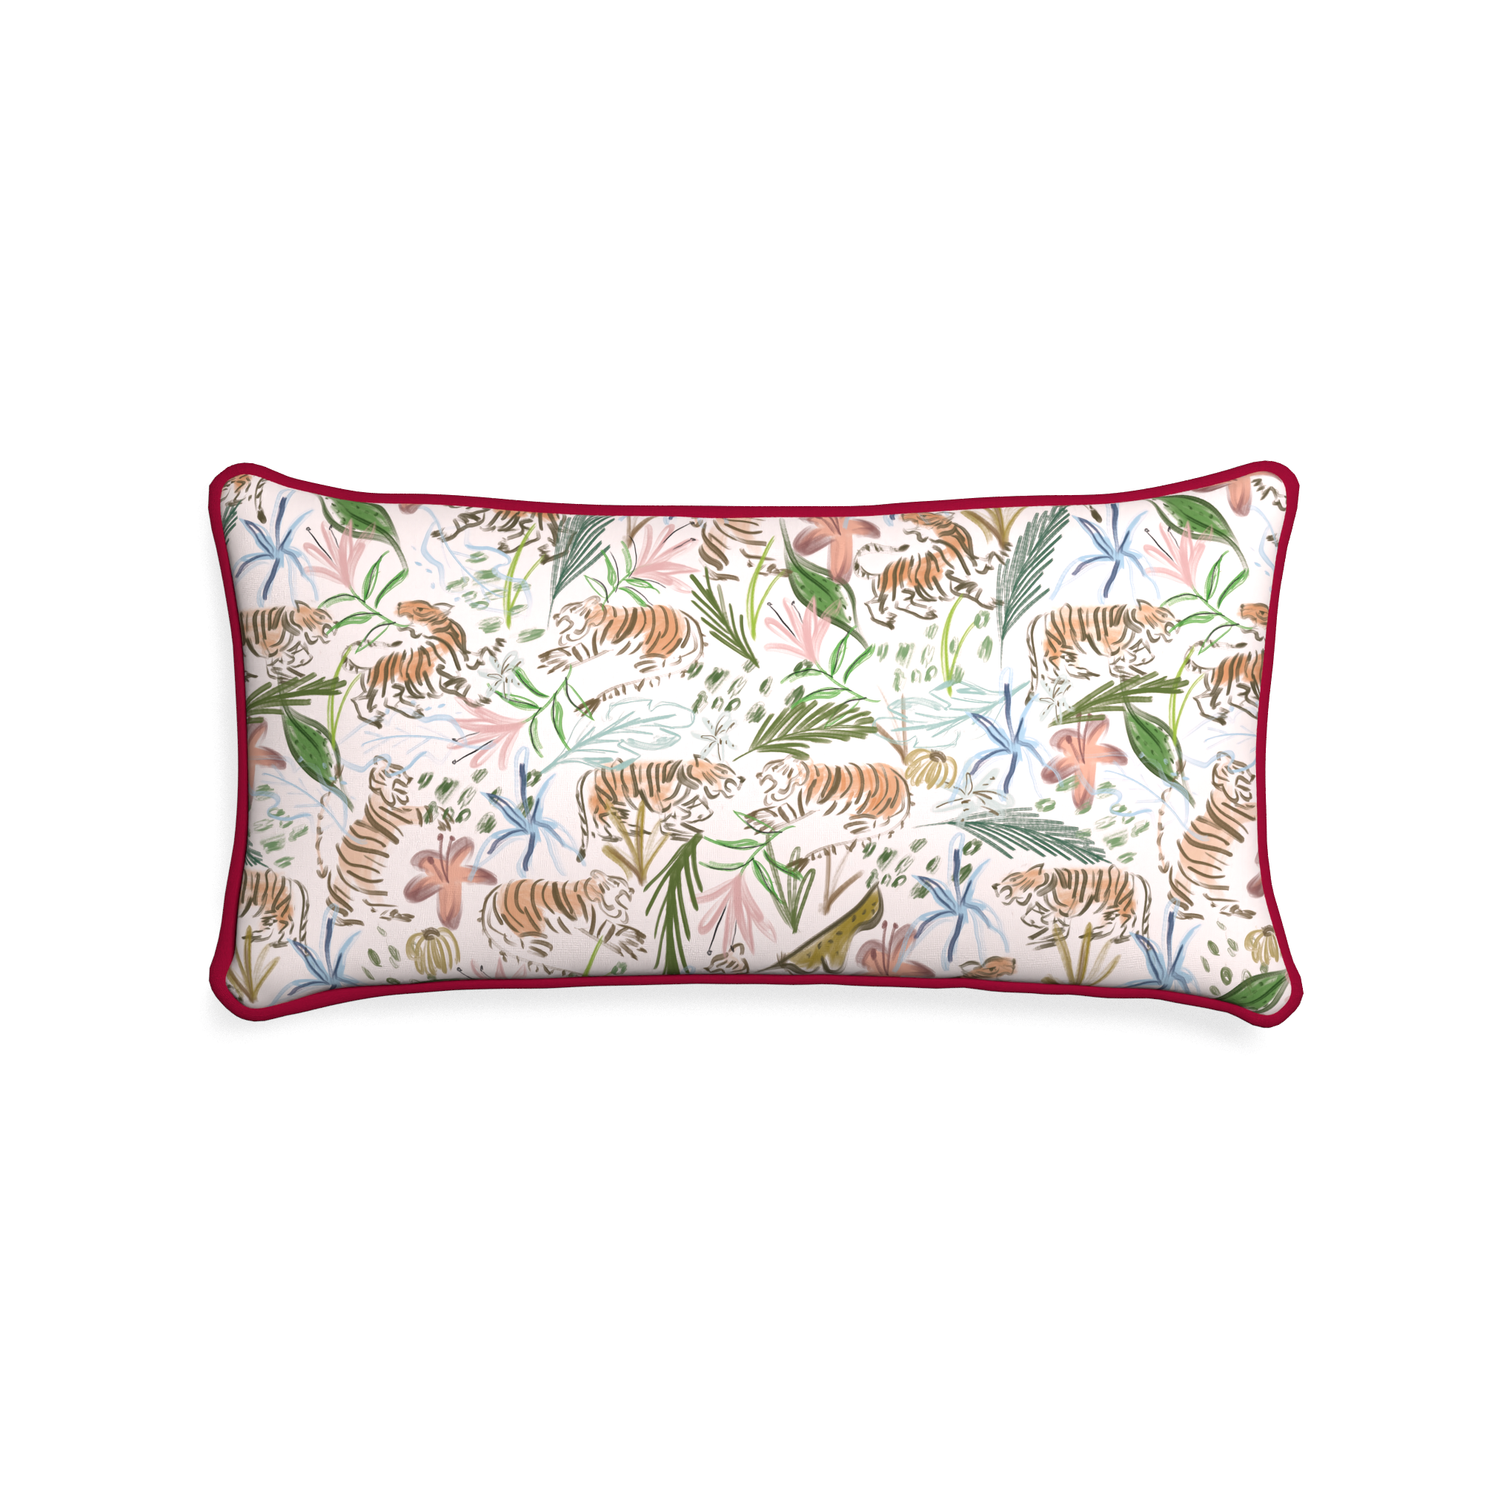 Midi-lumbar frida pink custom pink chinoiserie tigerpillow with raspberry piping on white background